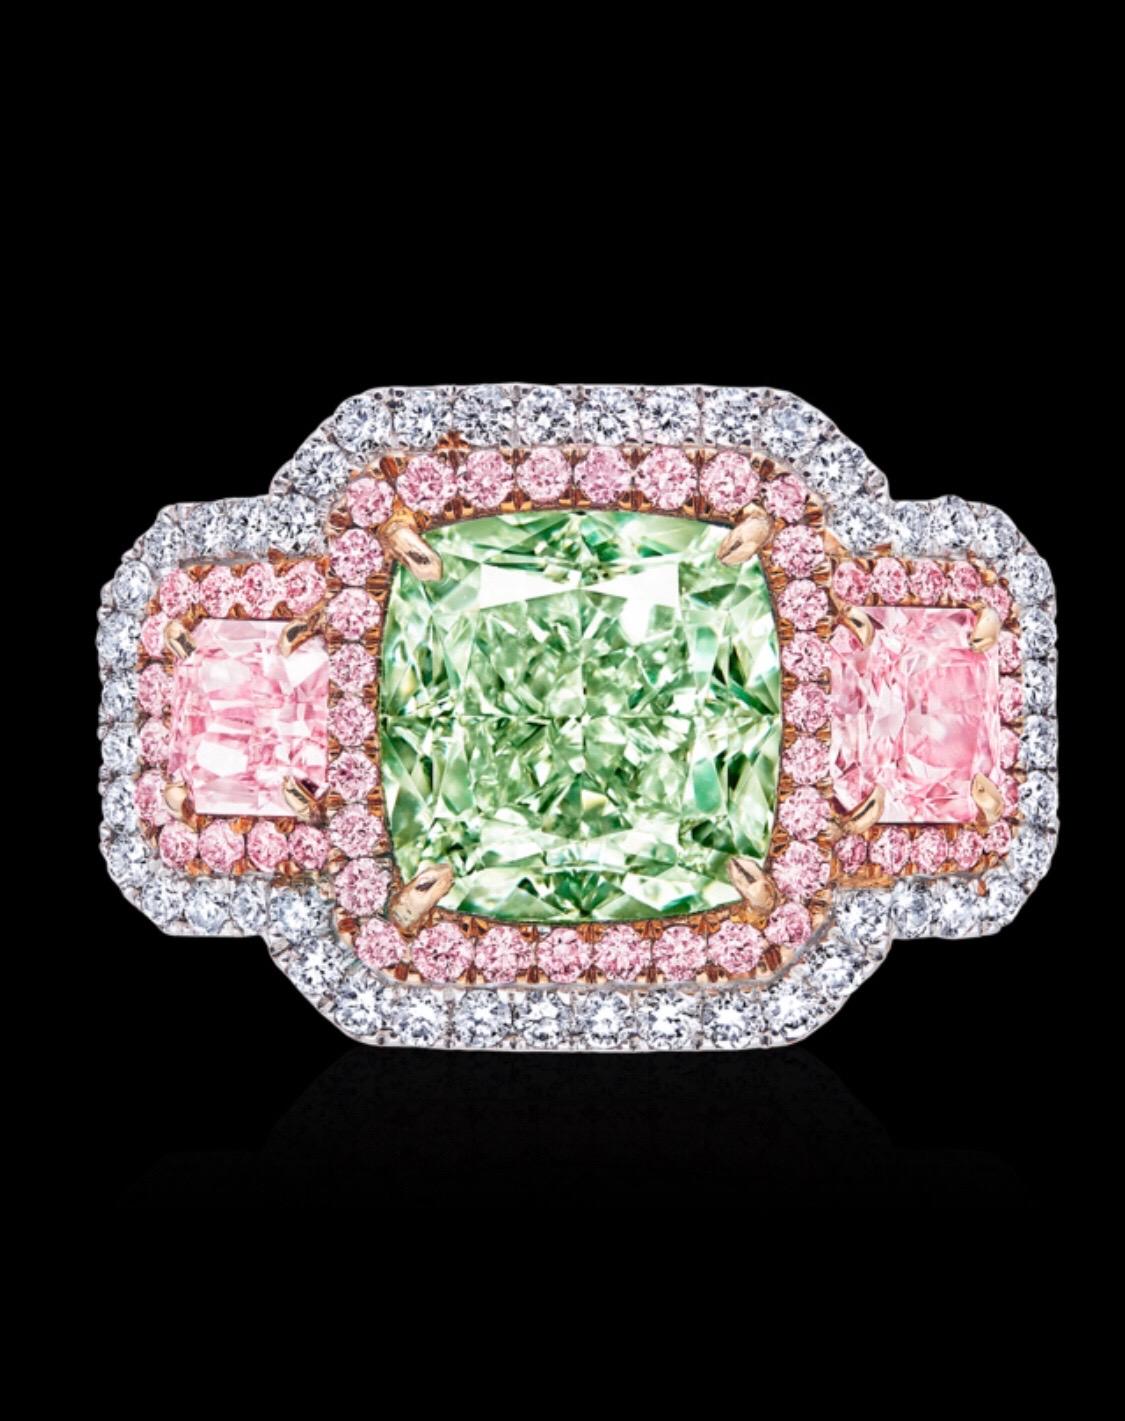 From the Emilio Jewelry Museum Vault, We are Showcasing a stunning 3.00 carat center Gia Certified natural fancy light pure green diamond center, with no secondary color flanked by natural fancy light pink diamonds on the side .70ct. Emilio is an